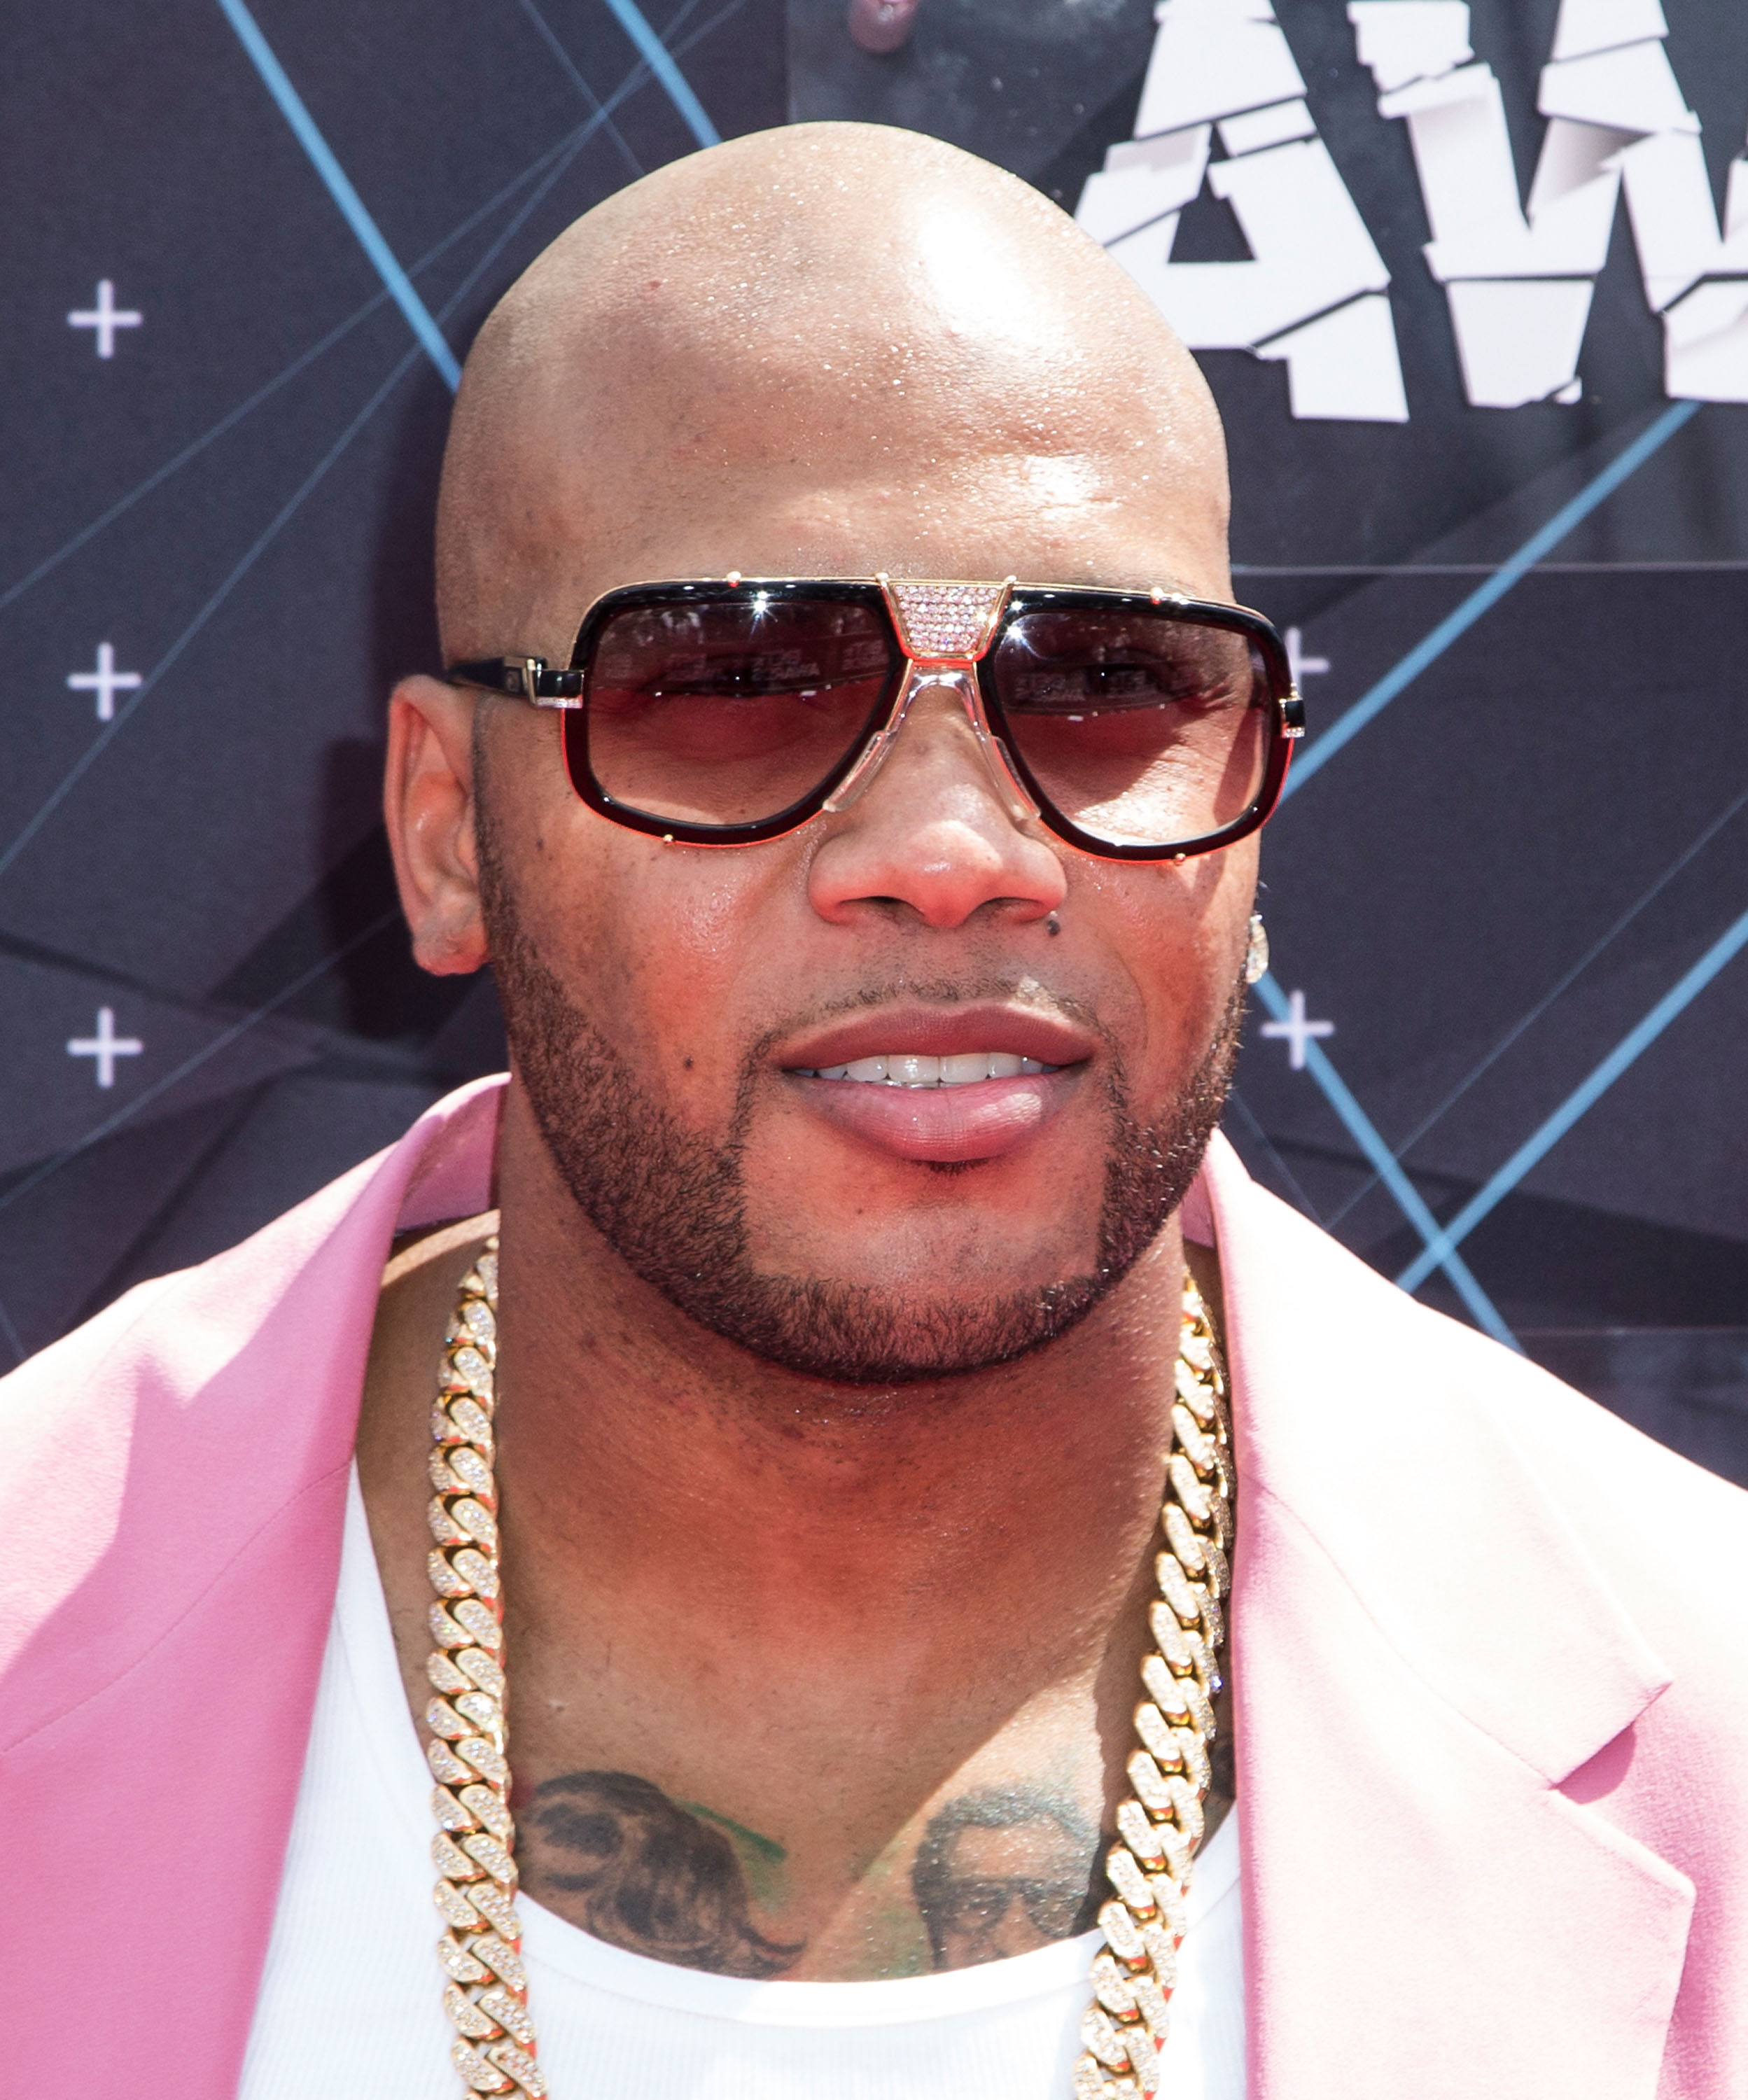 Rapper Flo Rida attends the 2015 BET Awards on June 28, 2015 in Los Angeles, Calif. (Vincent Sandoval—WireImage/Getty Images)